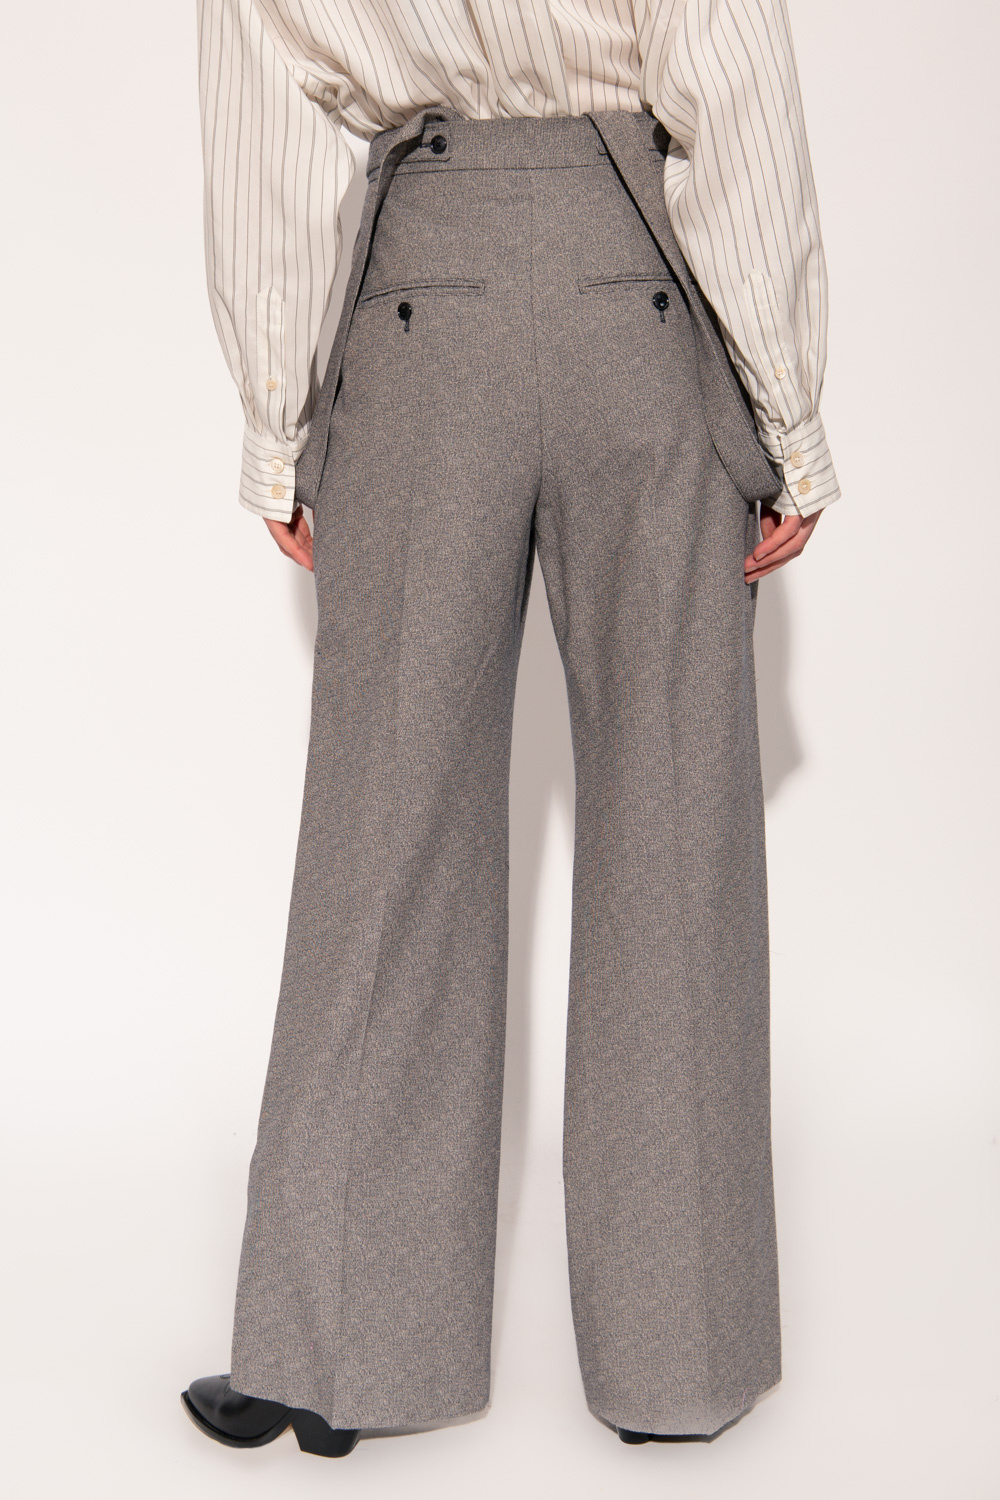 Isabel Marant ’Jessica’ tailored trousers with suspenders